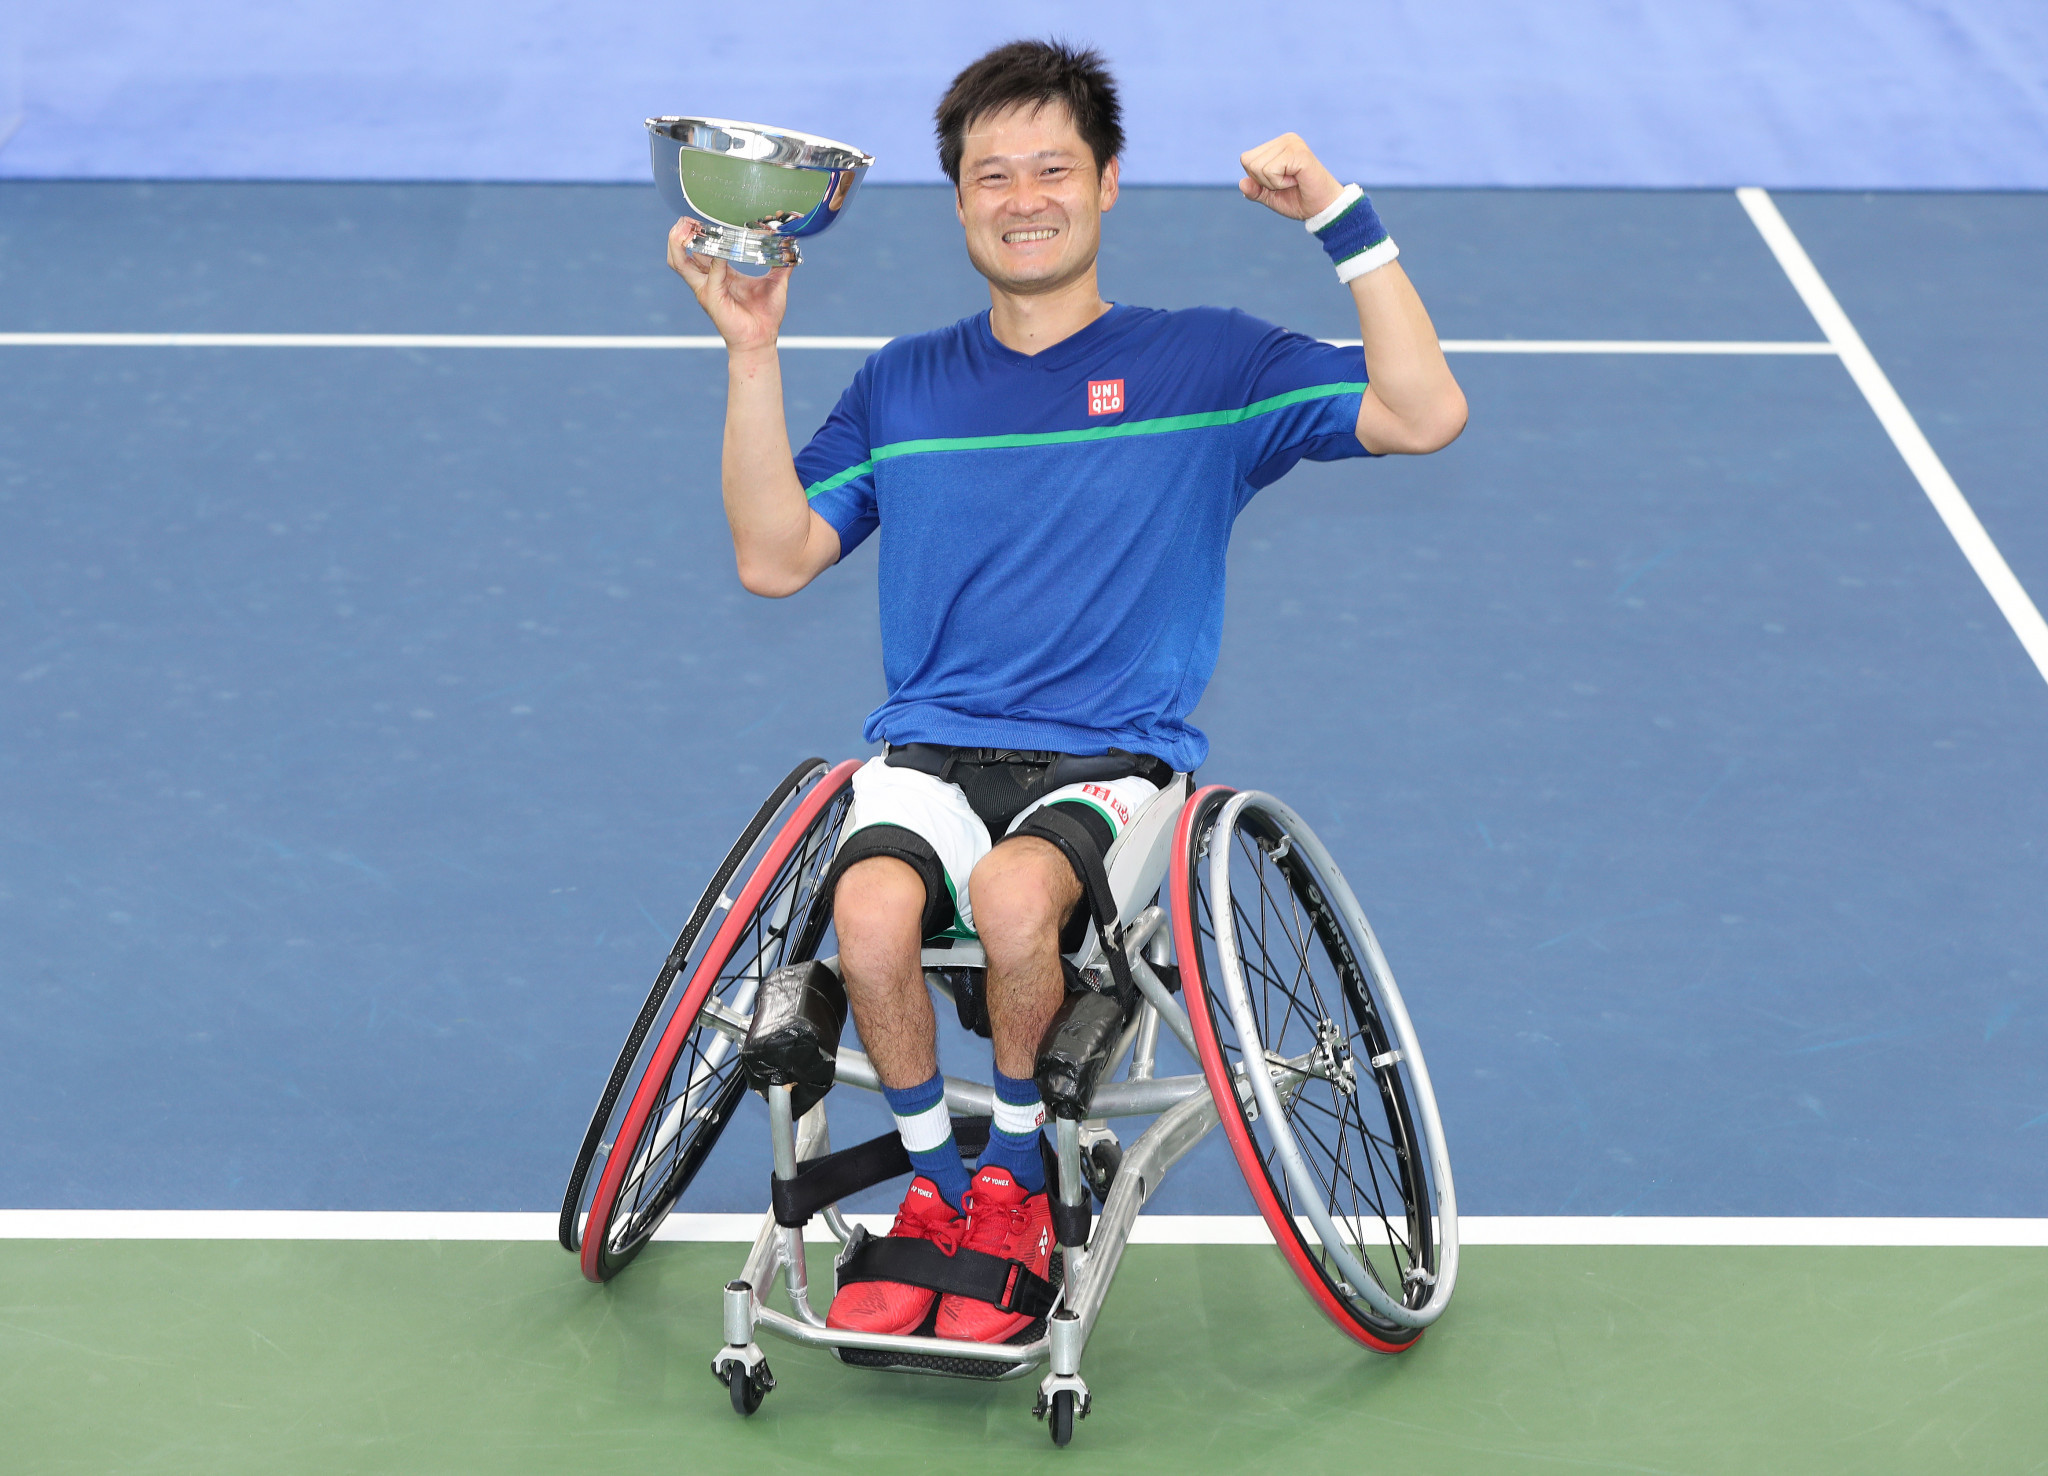 US Open showed Tokyo 2020 can be held safely, claims Japanese wheelchair tennis star